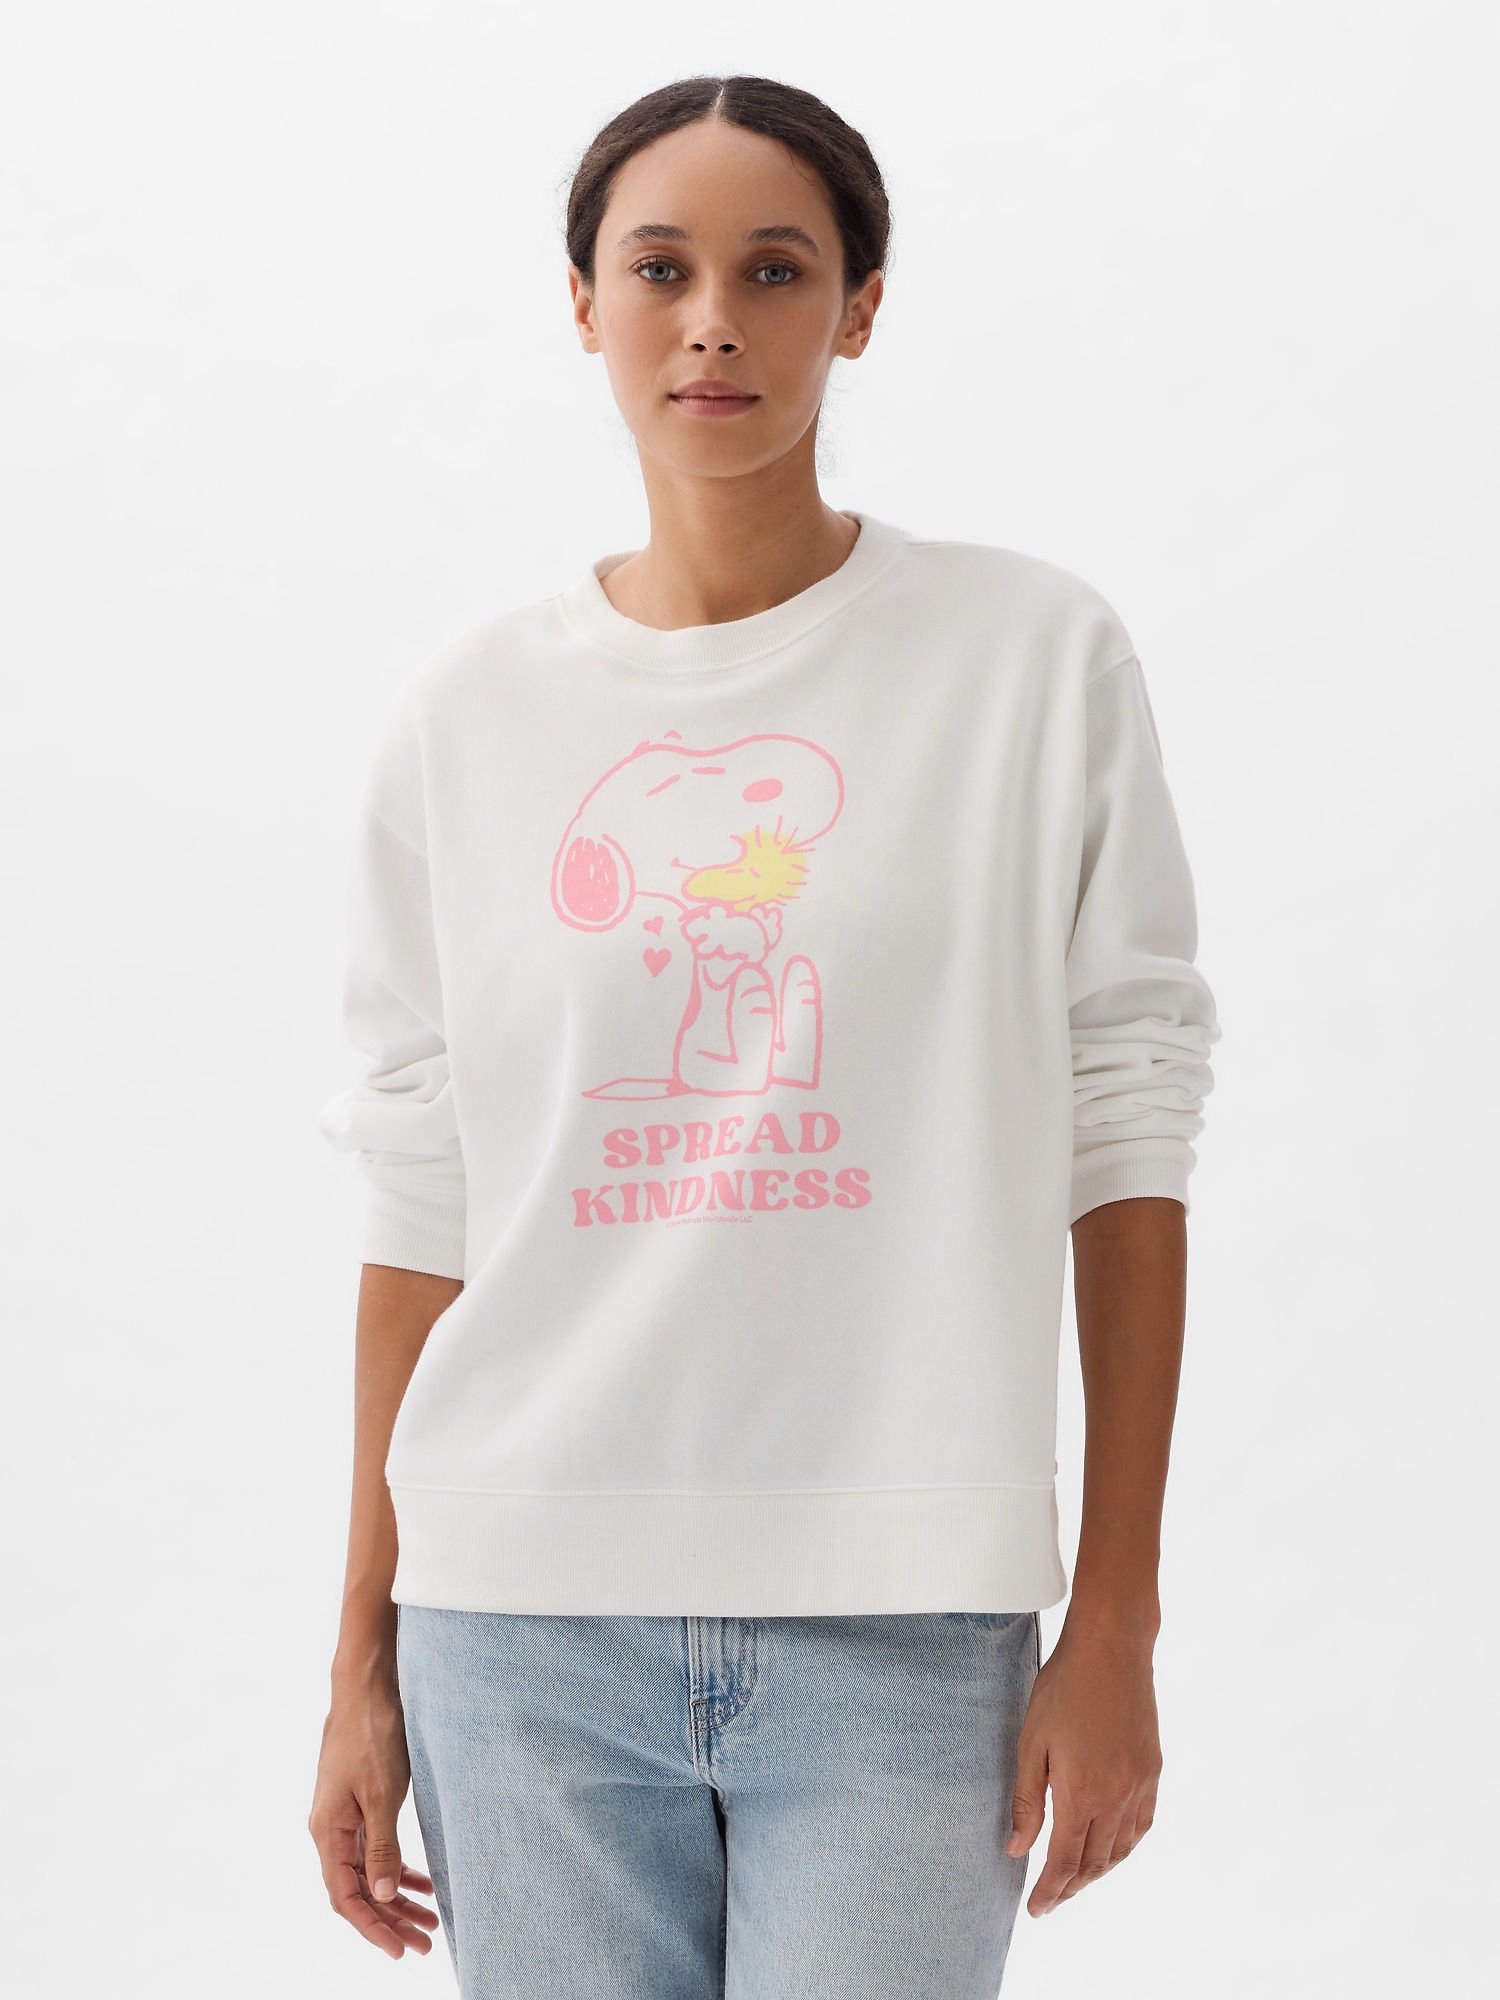 Relaxed Peanuts Graphic Sweatshirt